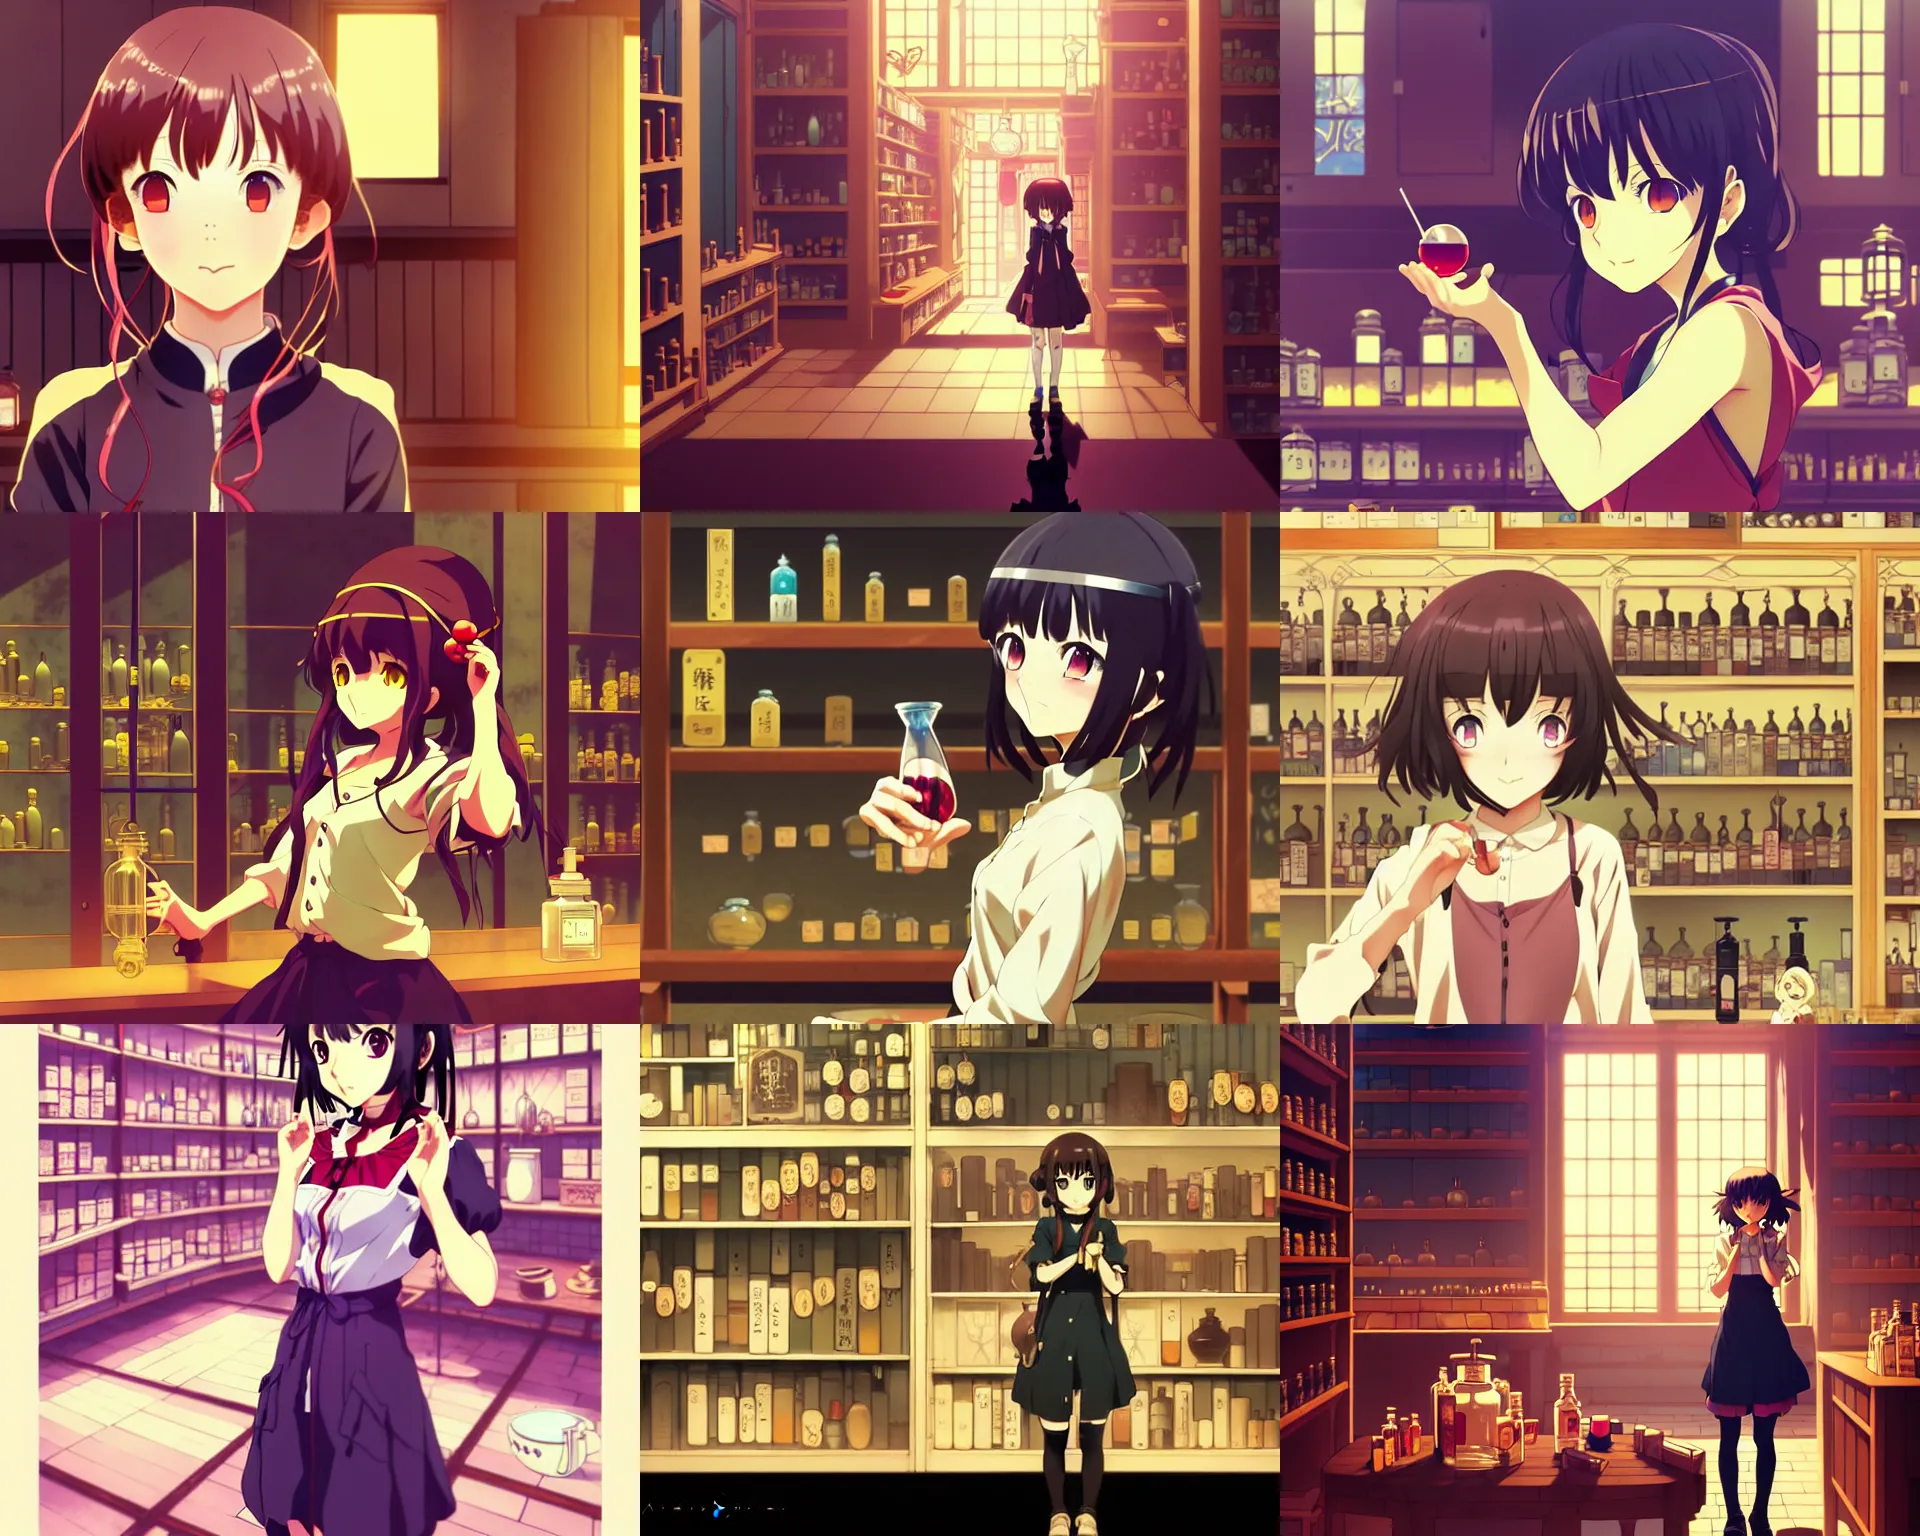 Prompt: anime frames, anime visual, portrait of a young female traveler in a alchemist's potion shop interior, cute face by ilya kuvshinov and yoh yoshinari, katsura masakazu, mucha, dynamic pose, dynamic perspective, strong silhouette, anime cels, rounded eyes, smooth facial features